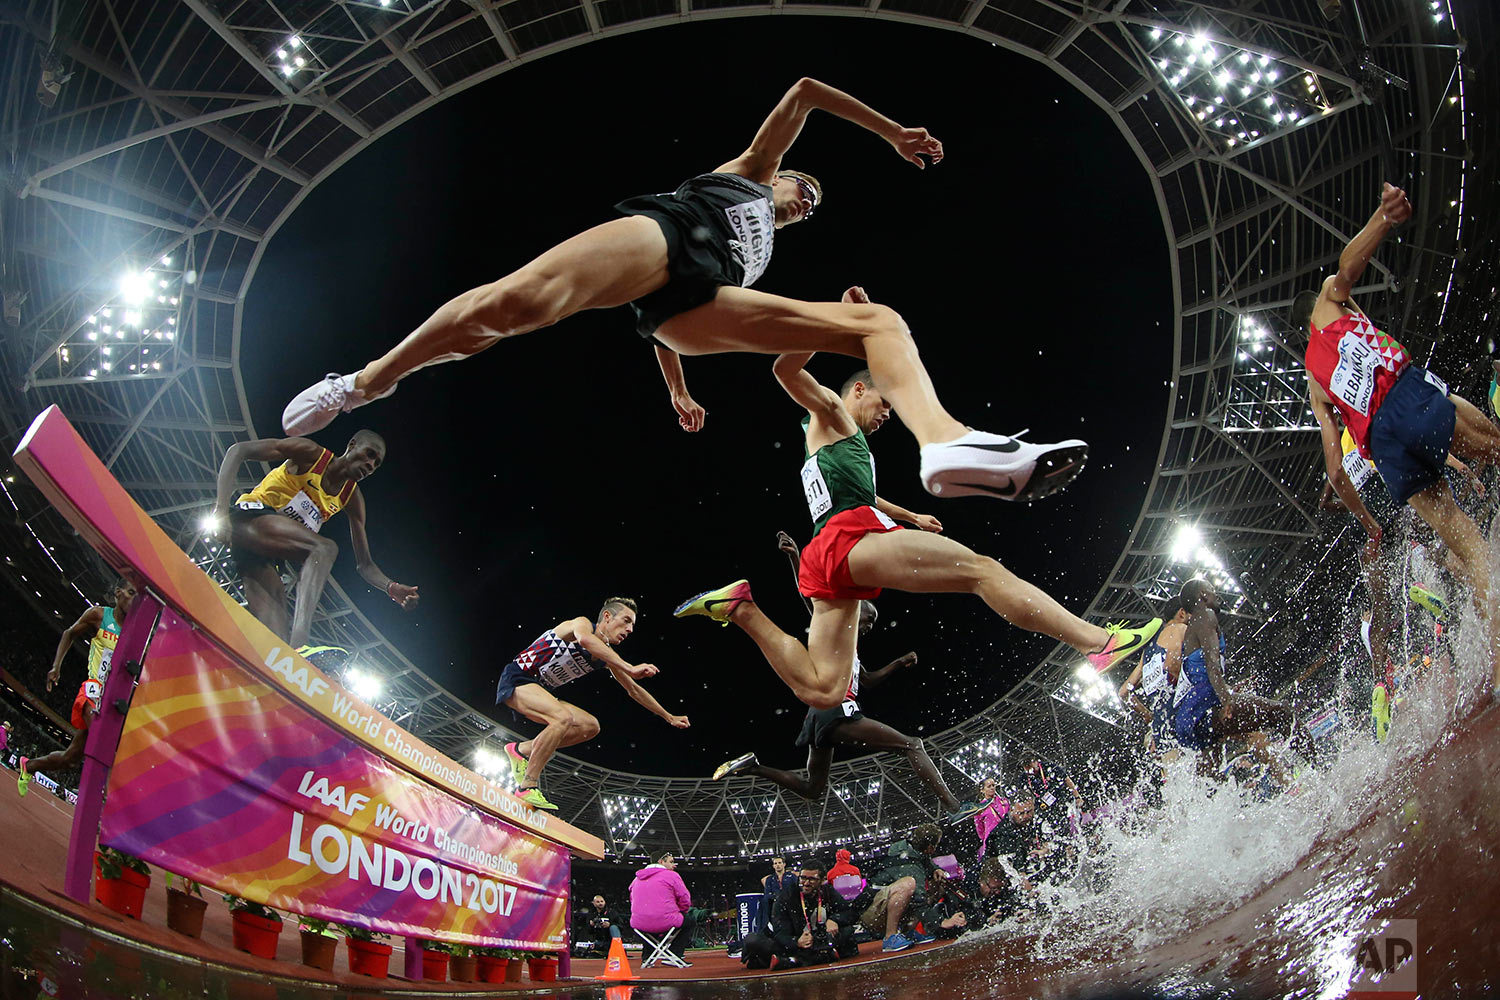  Athletes compete in the men's 3000-meter steeplechase final during the World Athletics Championships in London Tuesday, Aug. 8, 2017. (AP Photo/Matthias Schrader) 